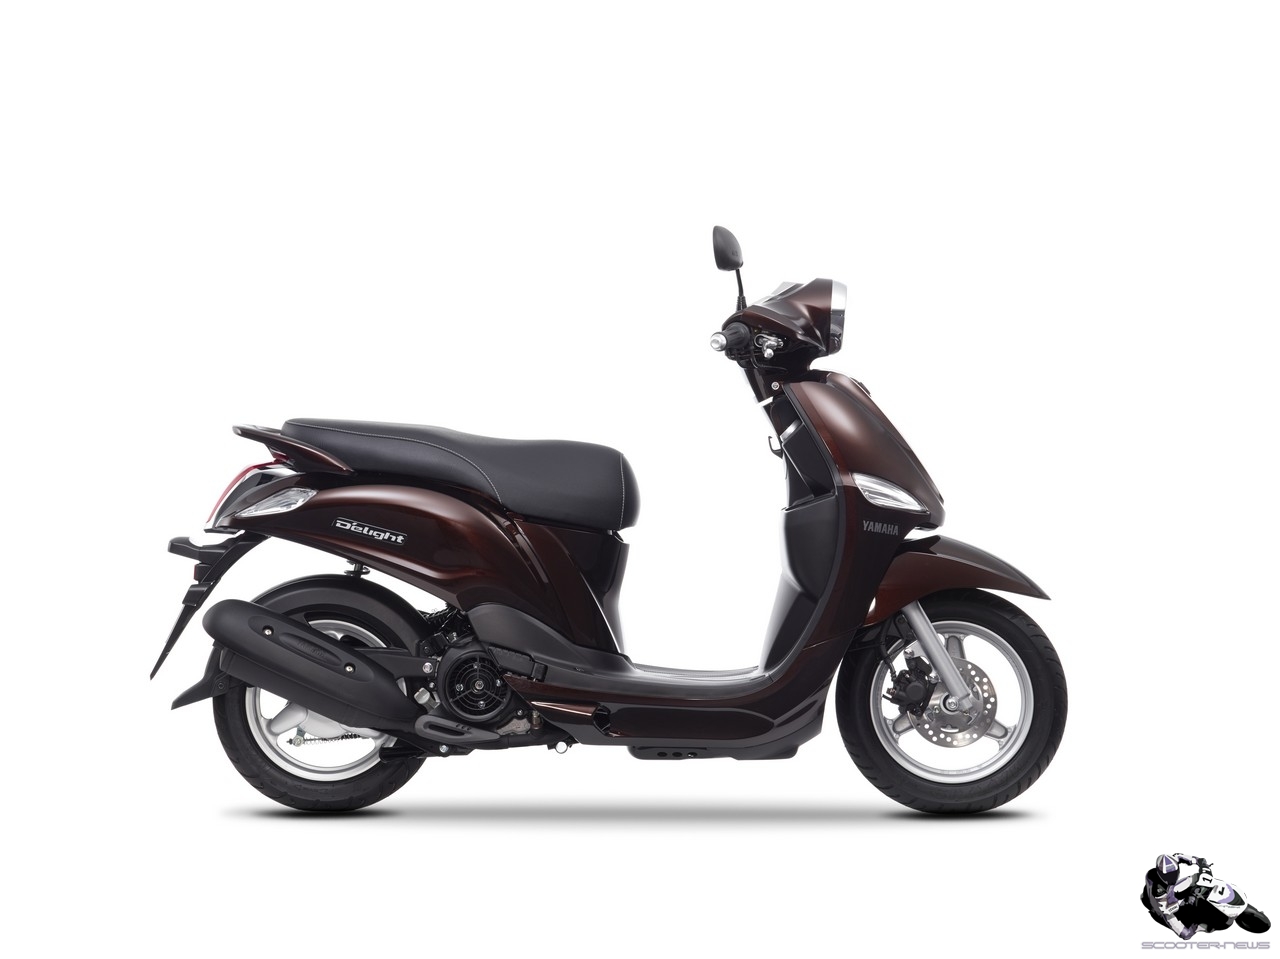 Yamaha delight 2021 125cc scooter price, specifications, videos